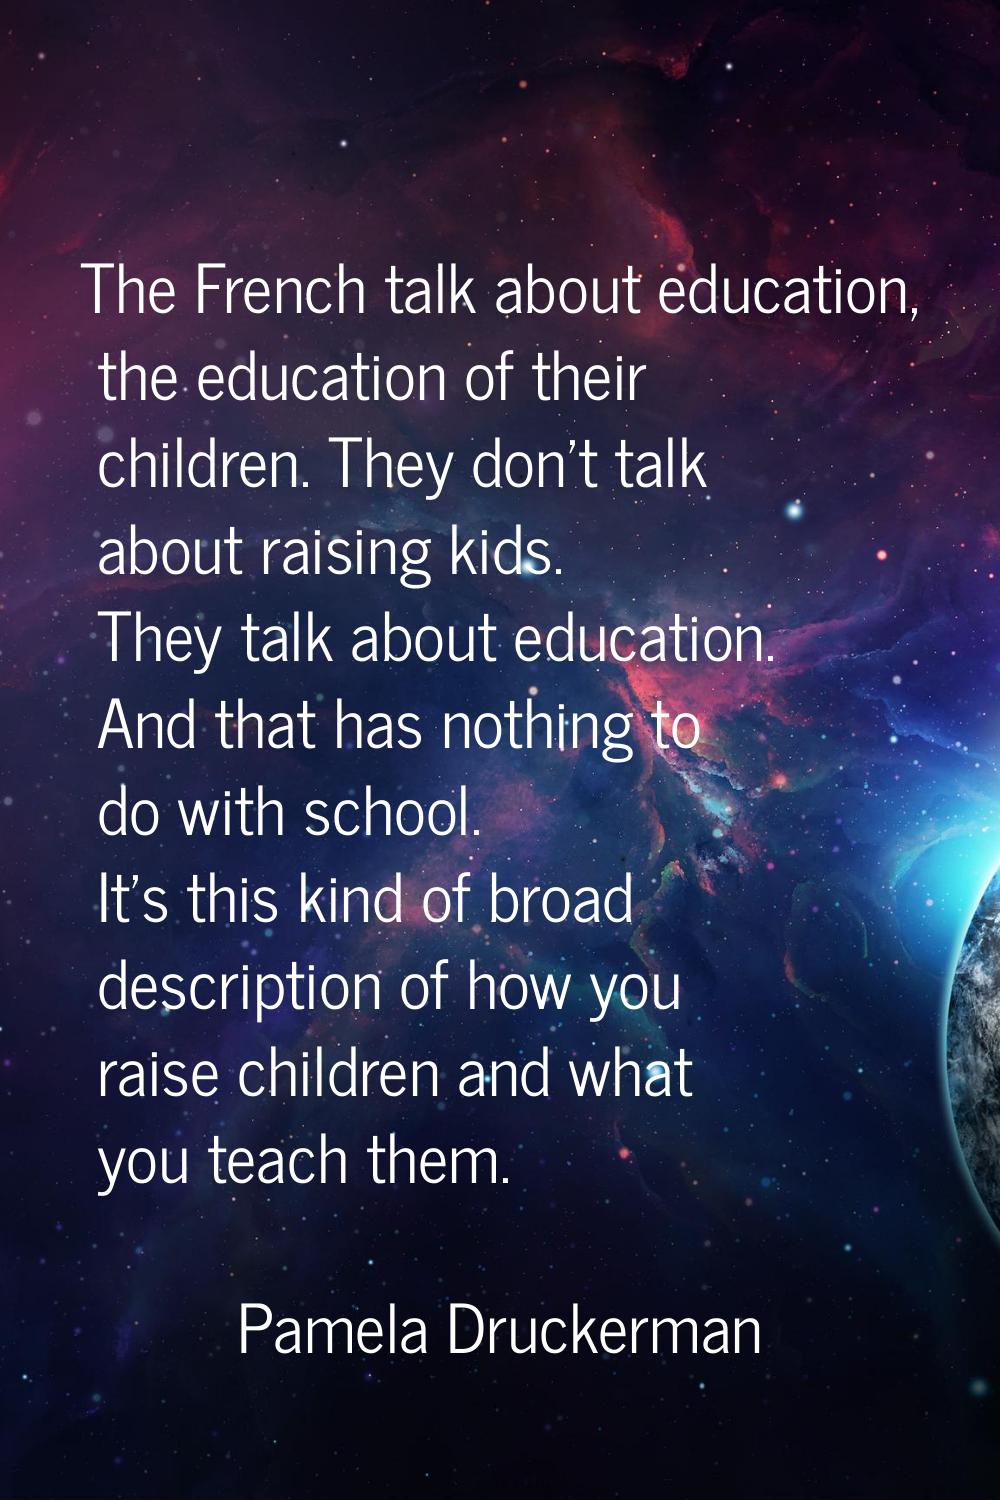 The French talk about education, the education of their children. They don't talk about raising kid